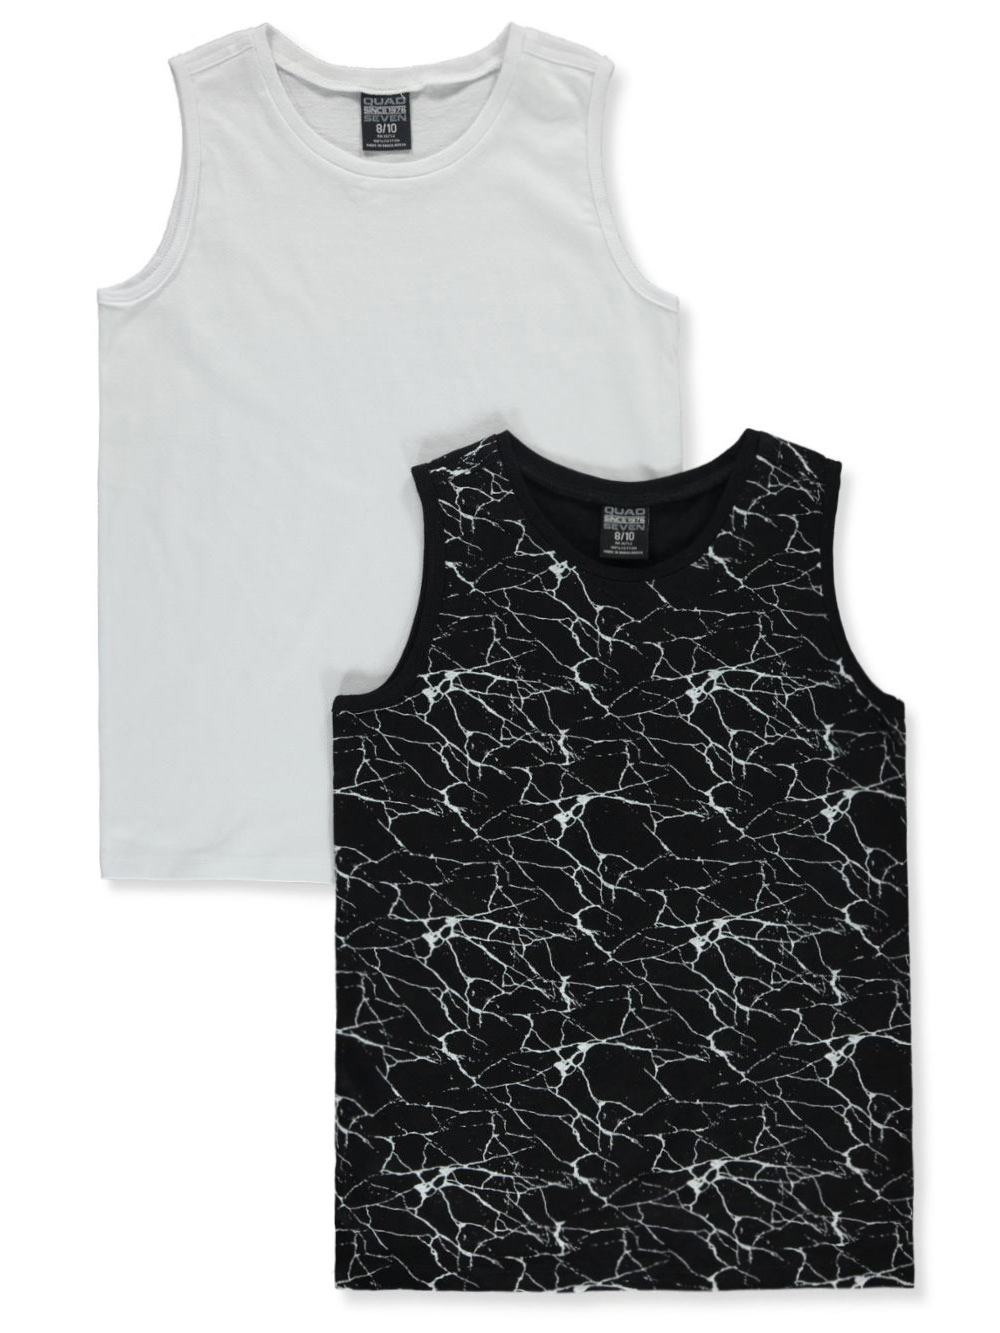 Size 8-10 Tank for Boys